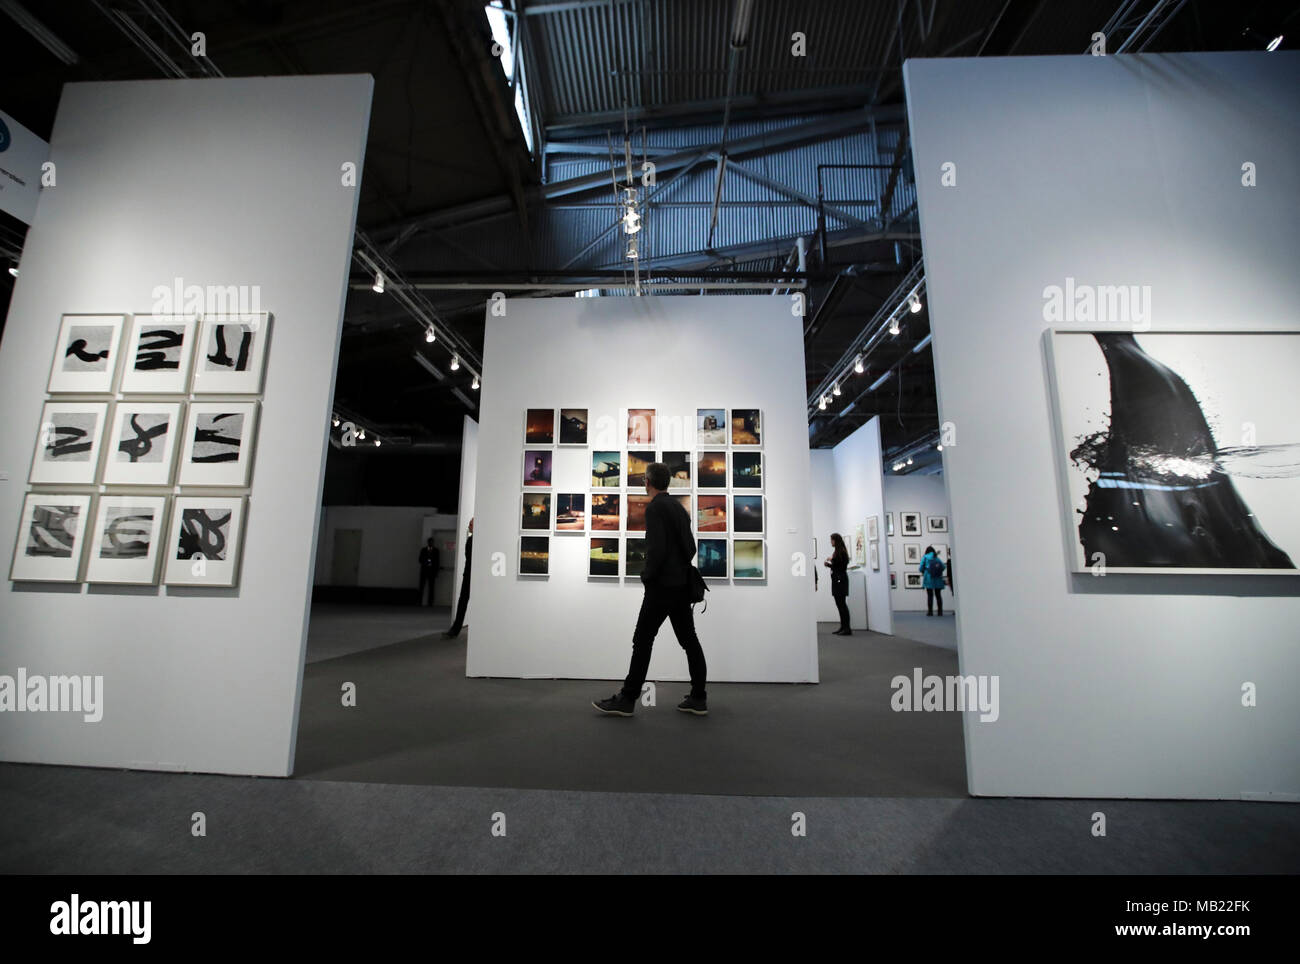 New York, USA. 5th Apr, 2018. Visitors look at photography works at AIPAD (Association of International Photography Art Dealers)'s The Photography Show in New York, the United States, on April 5, 2018. The 38th edition of The Photography Show is held from April 5 to April 8. Around 100 of the world's leading fine art photography galleries present a range of museum-quality work including contemporary, modern, and 19th-century photographs, as well as photo-based art, video, and new media. Credit: Wang Ying/Xinhua/Alamy Live News Stock Photo